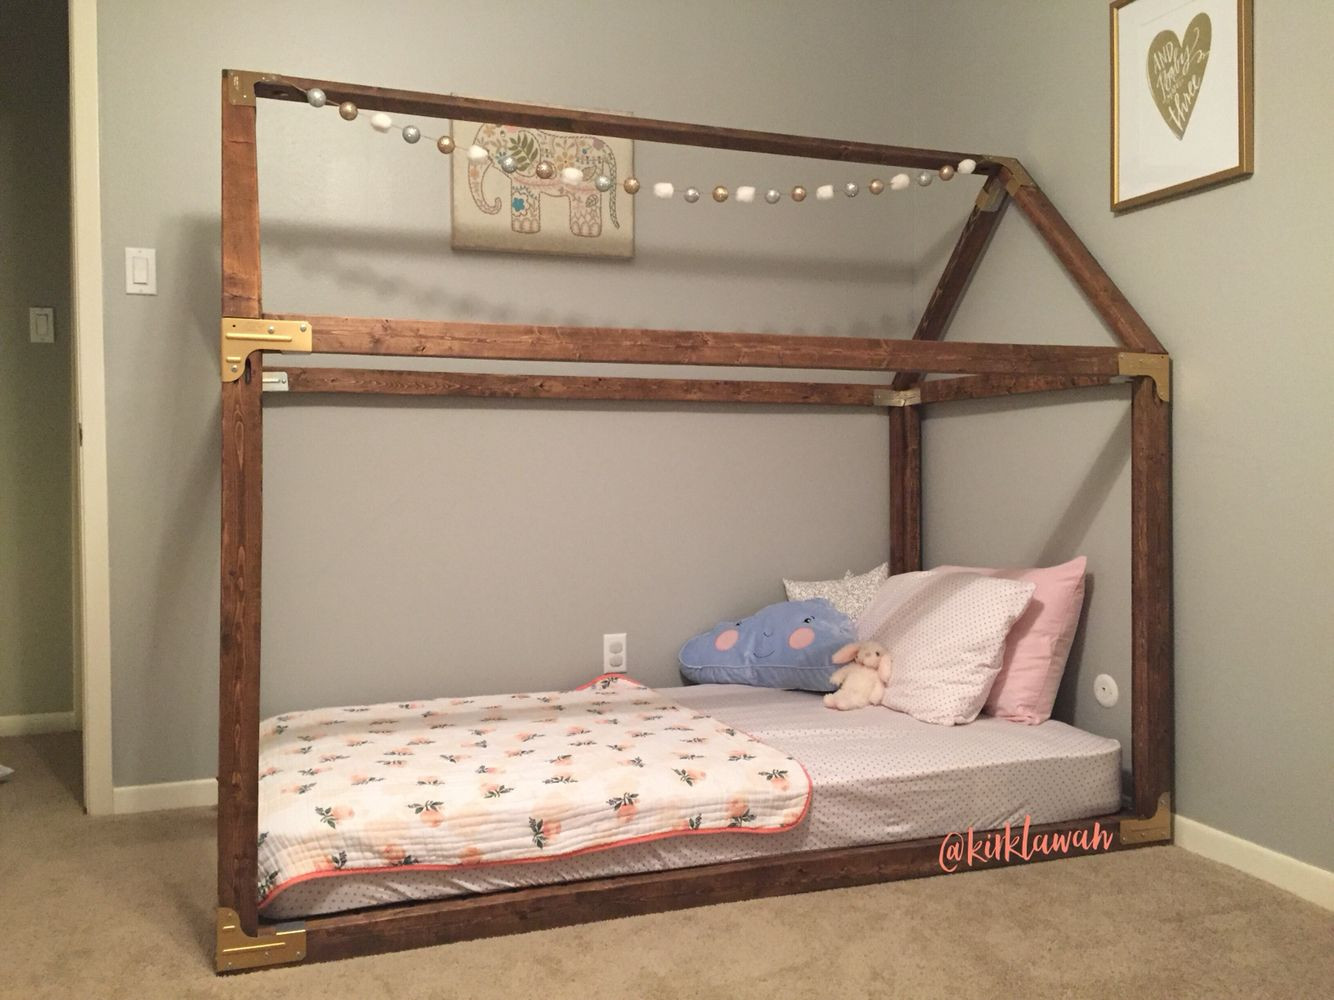 DIY Toddler Bed Plans
 Pin by Mr K on DIM in 2019